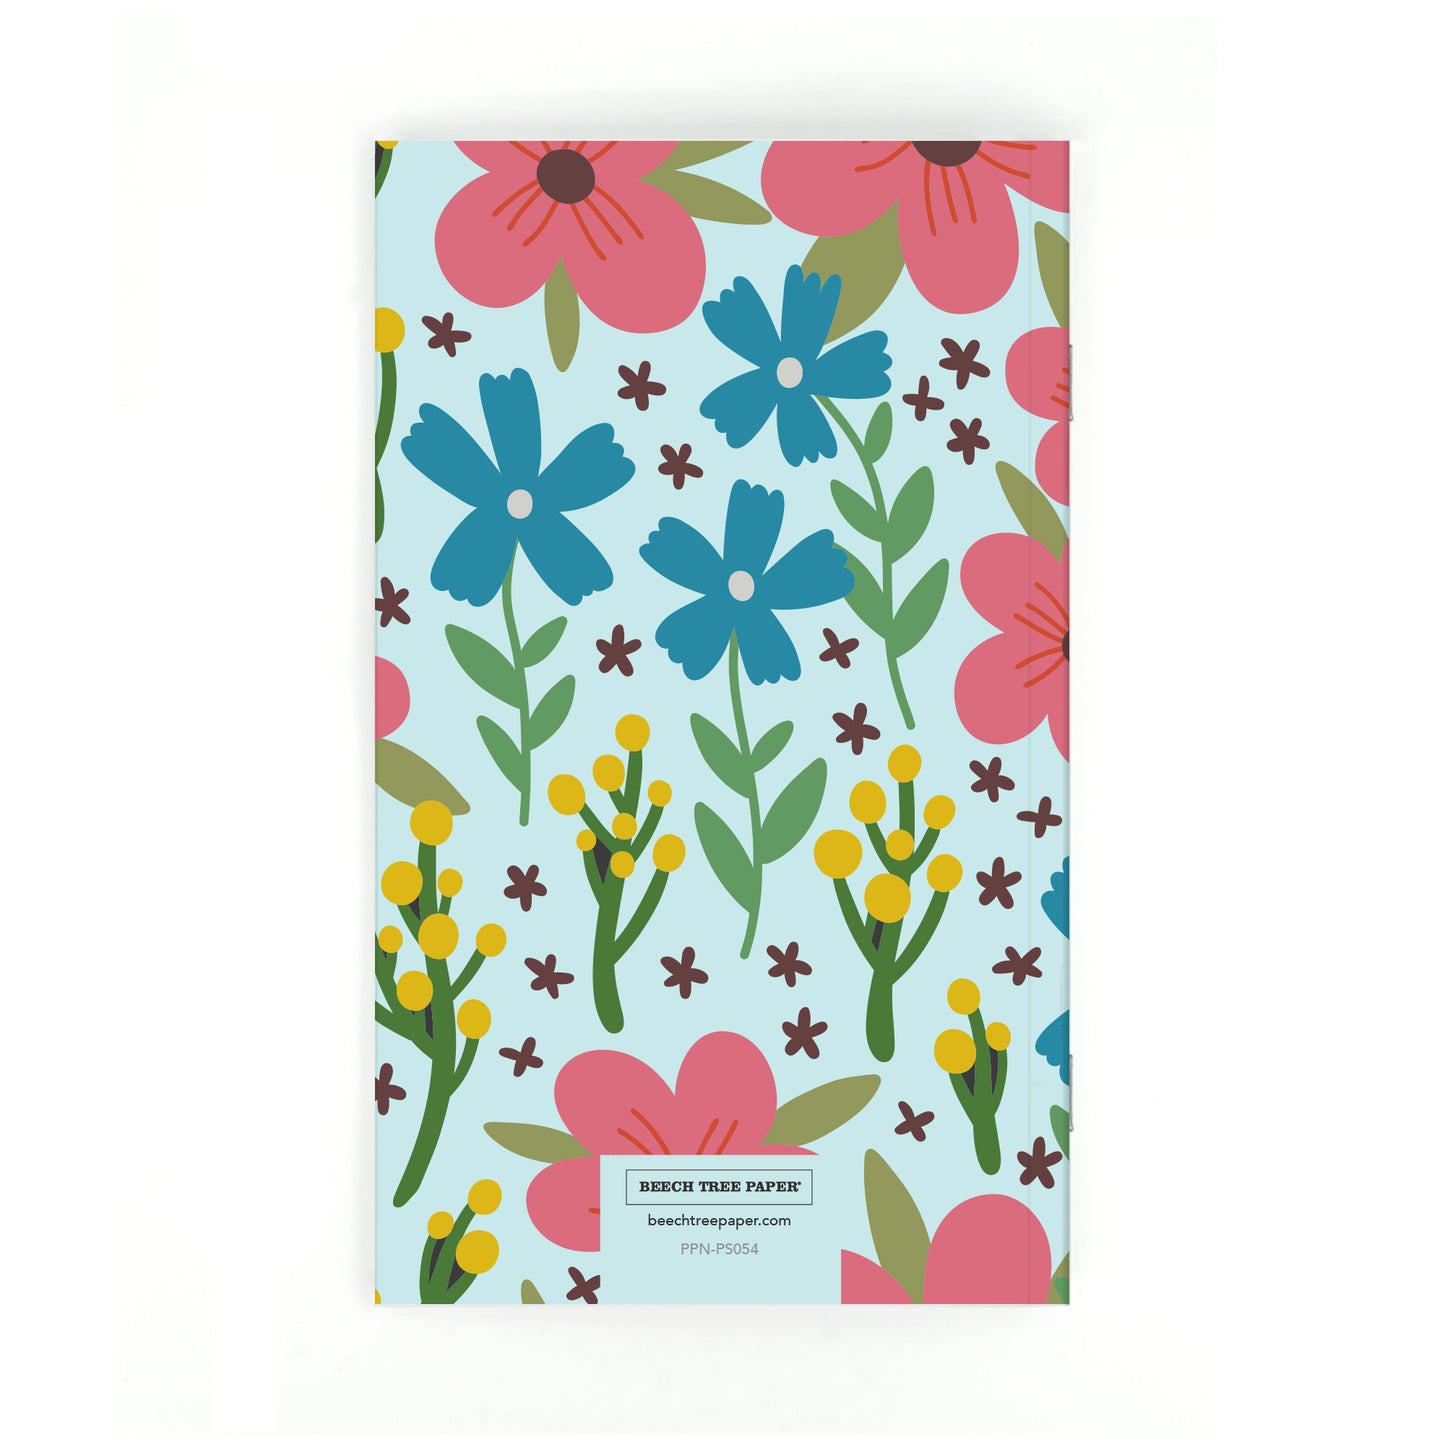 Personalized Notebook, Flower Garden, Add Your Name